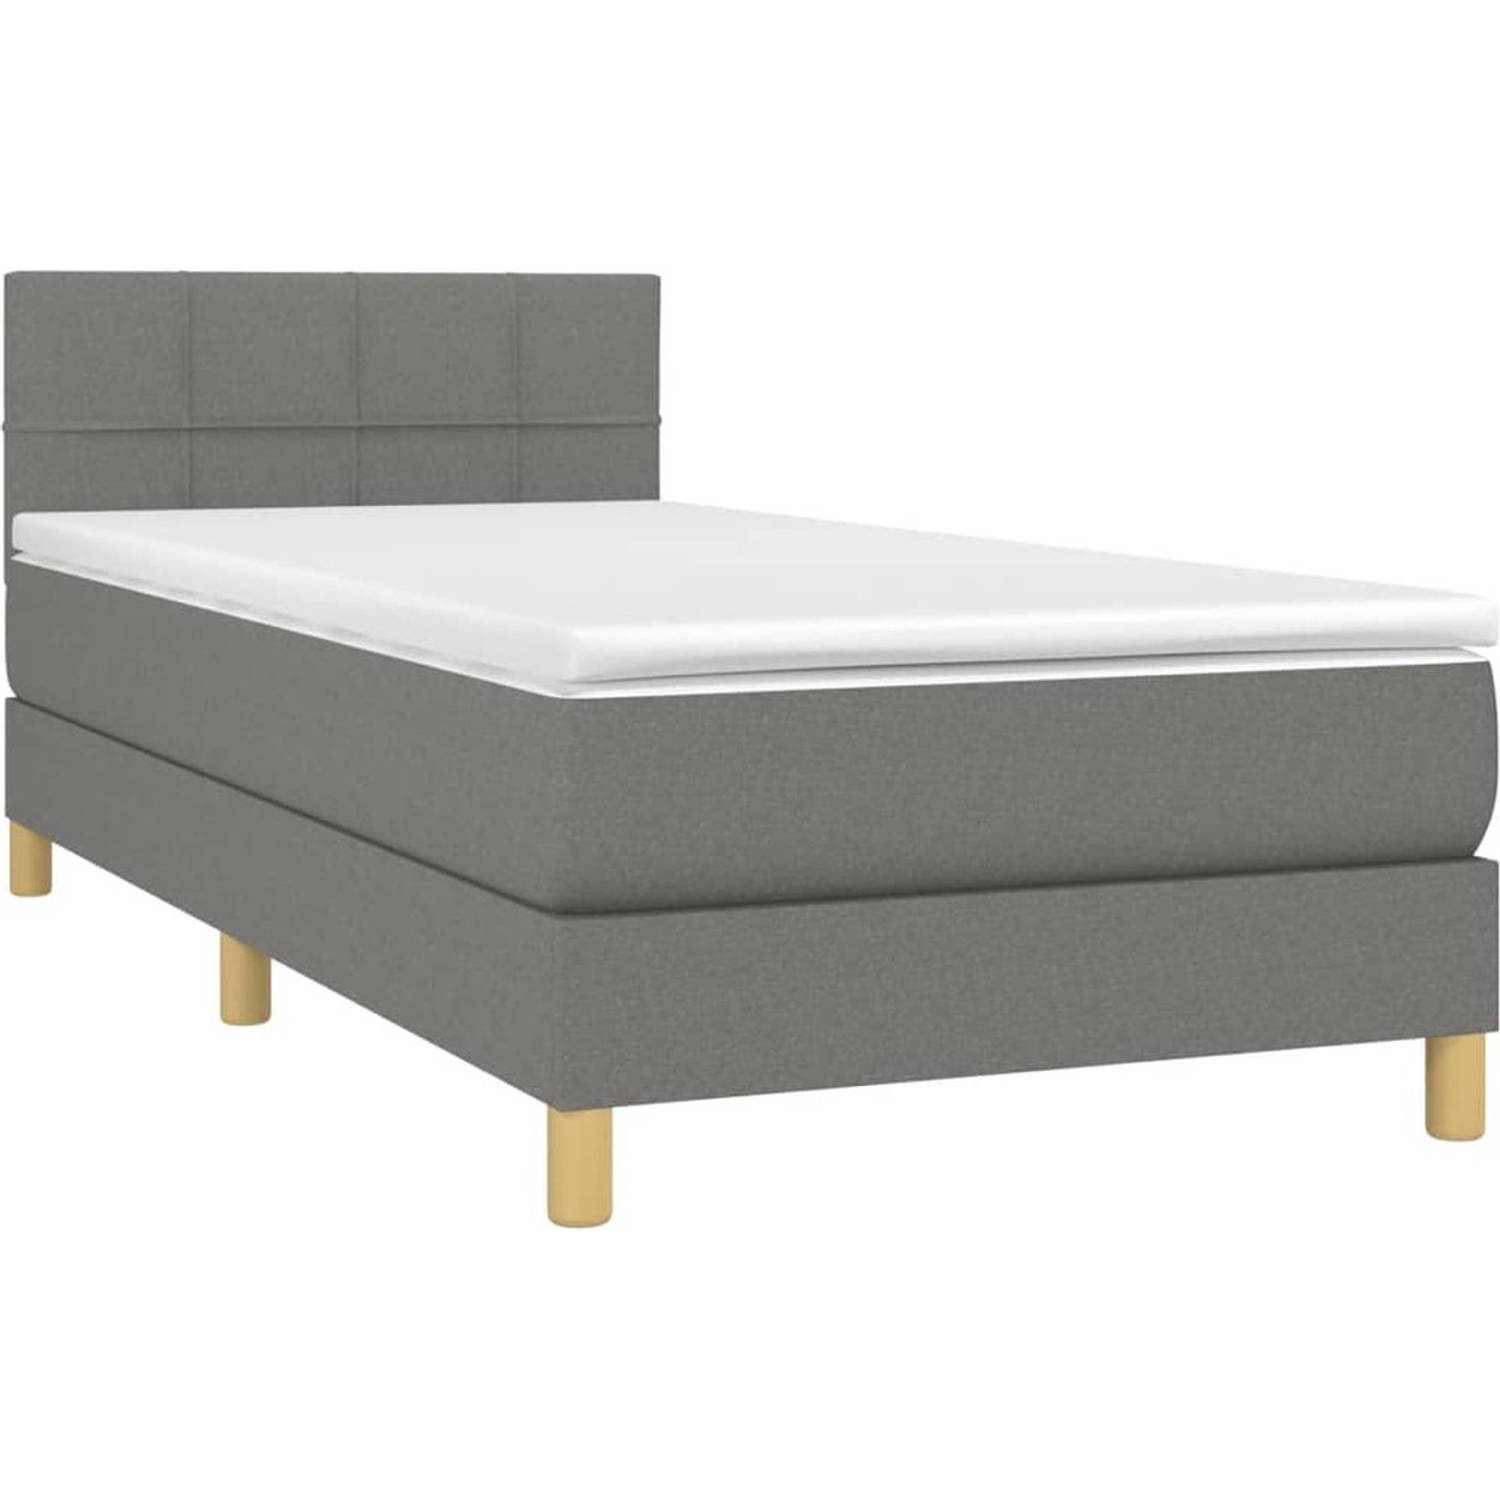 The Living Store Bed Classic - Boxspringbed - 193x90x78/88 cm - Donkergrijs